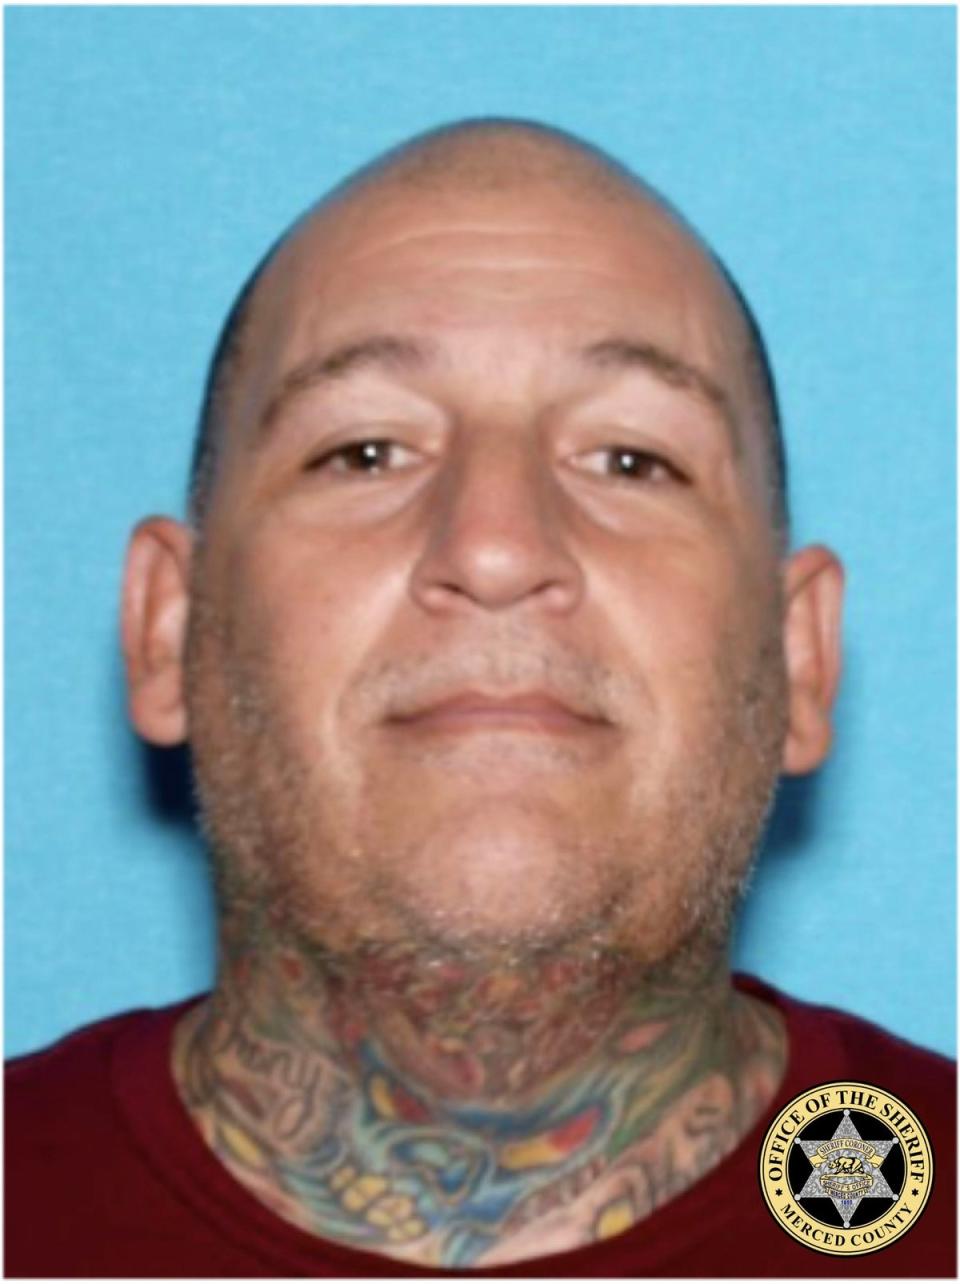 Jesus Manuel Salgado has been taken into custody in connection with the kidnapping of a family of four in Merced, California (Merced County Sheriff’s Office))